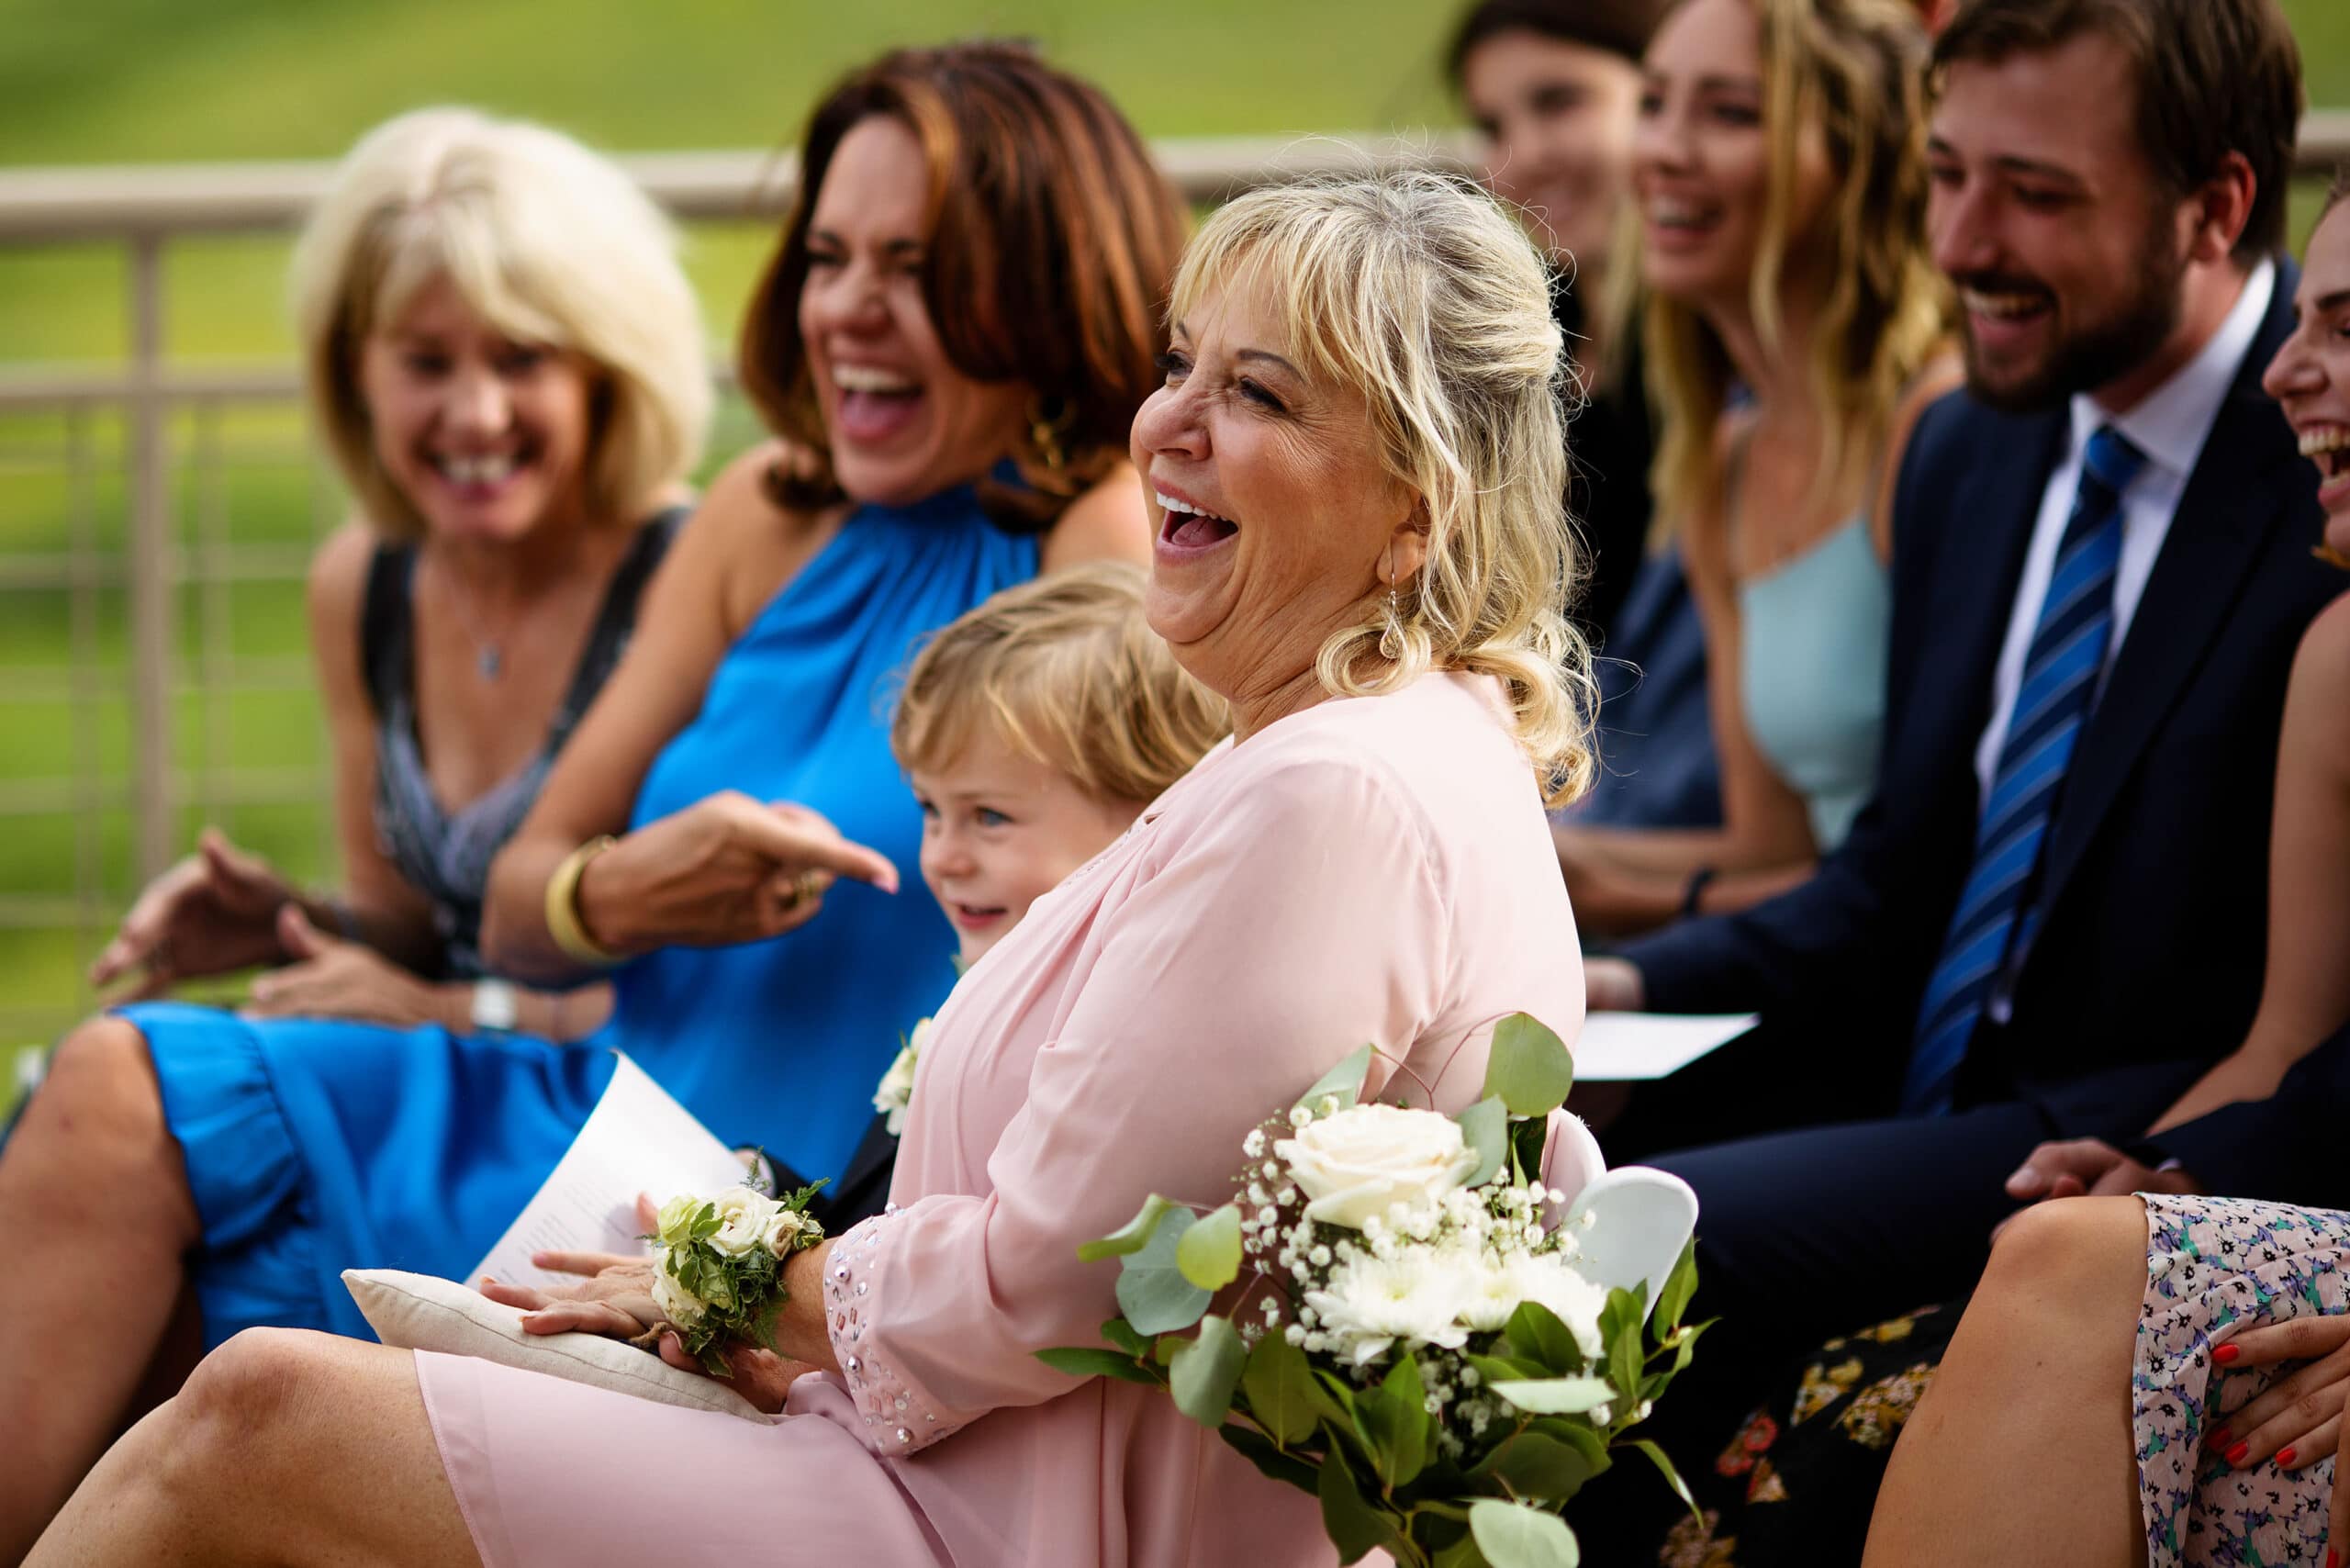 Mother of the groom and guests laugh during the ceremony